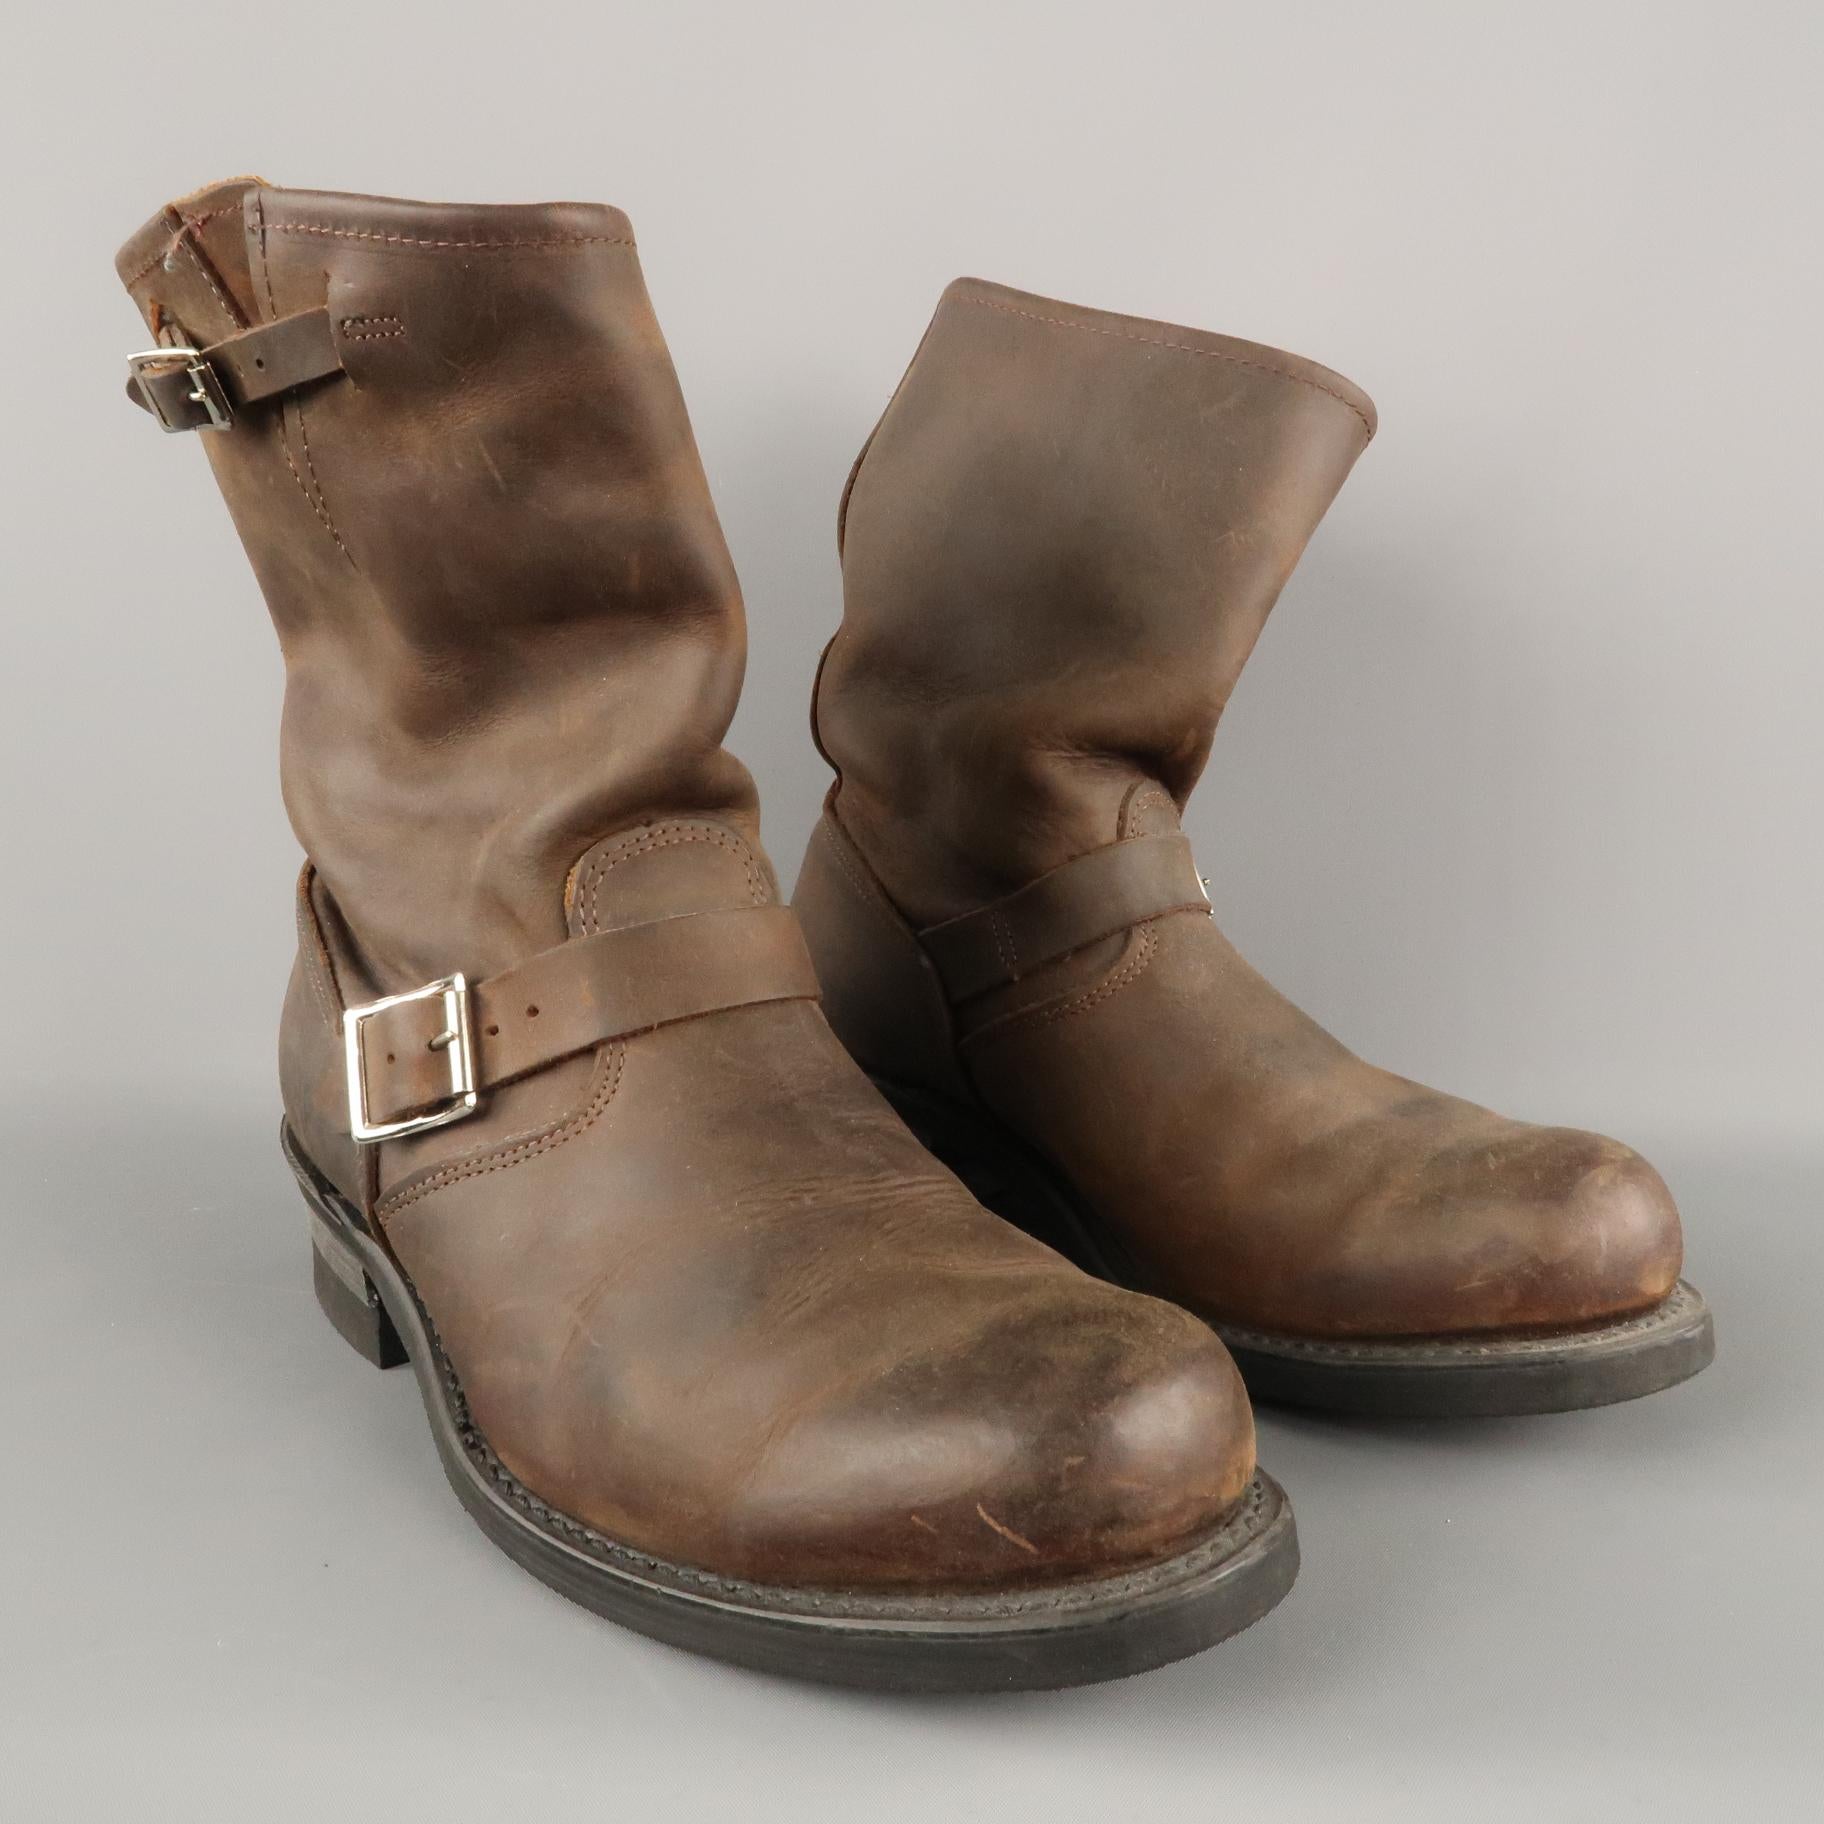 FRYE Biker Boots comes in a brown tone in a solid leather material, with a round toe, a double buckle and straps, in an 